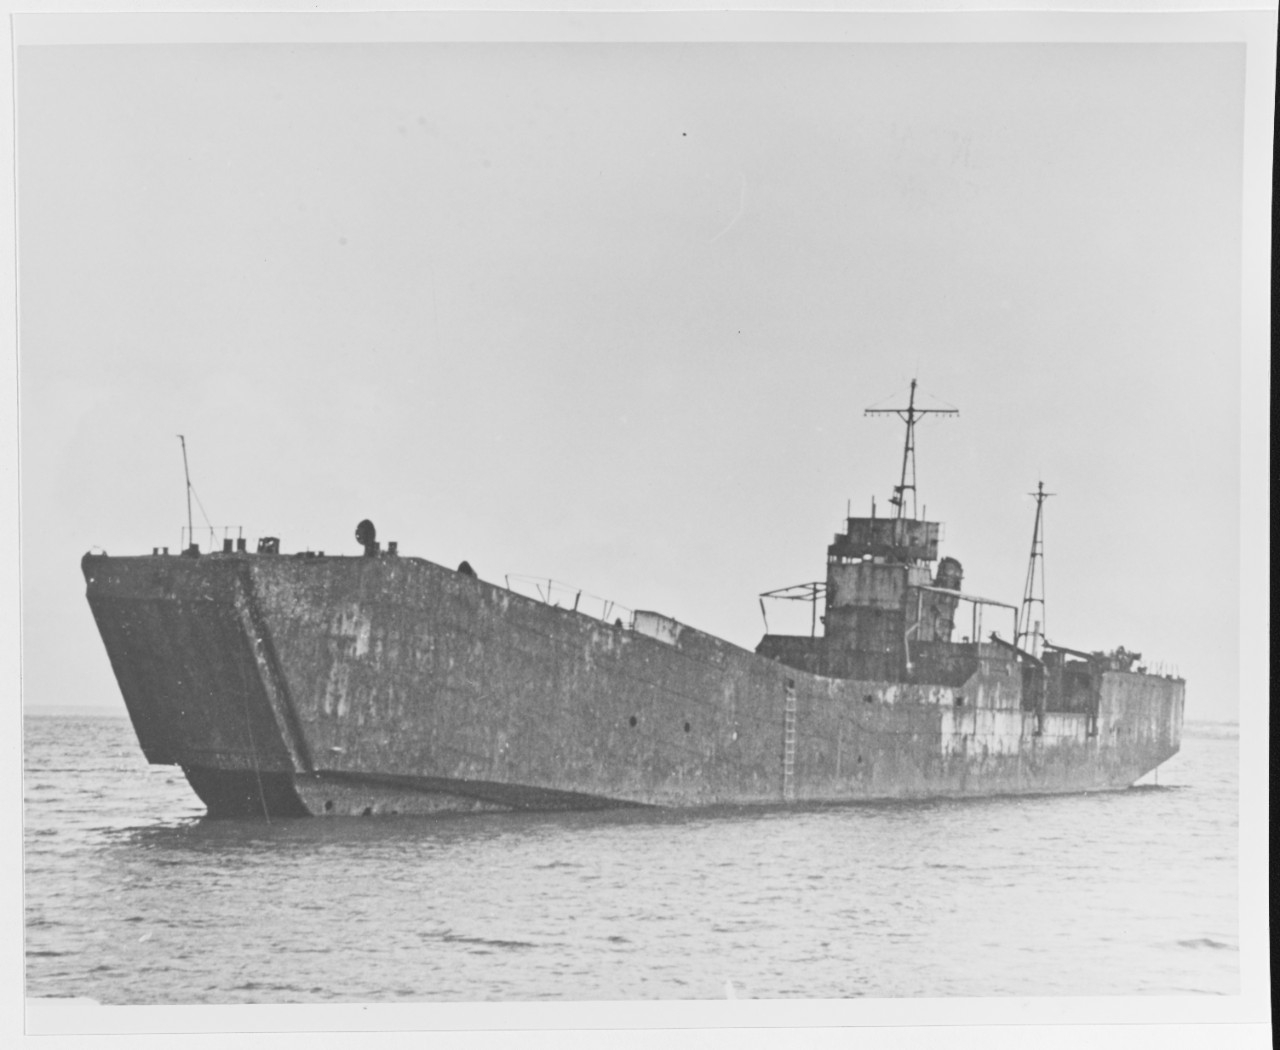 LU SHAN (Chinese LST, 1945, ex-Japanese T-172)